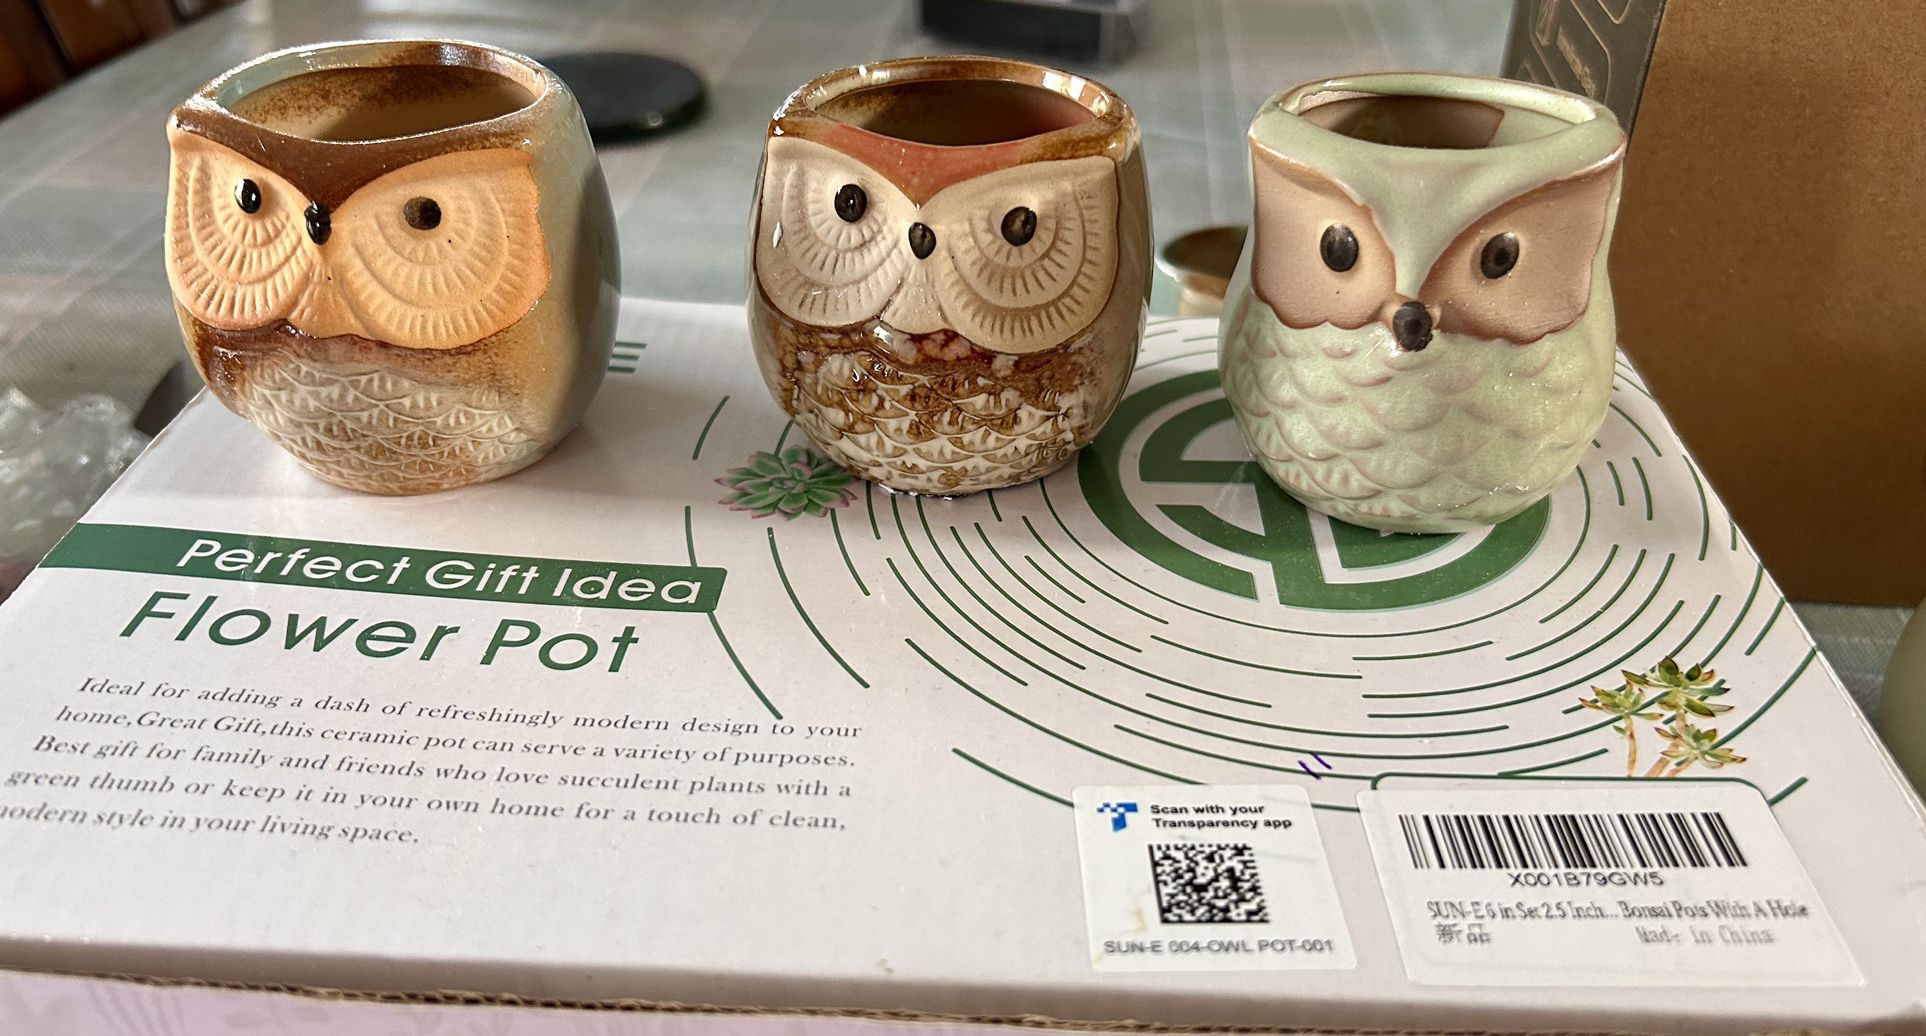 Small Owl Flower Pots For Small Plants. 